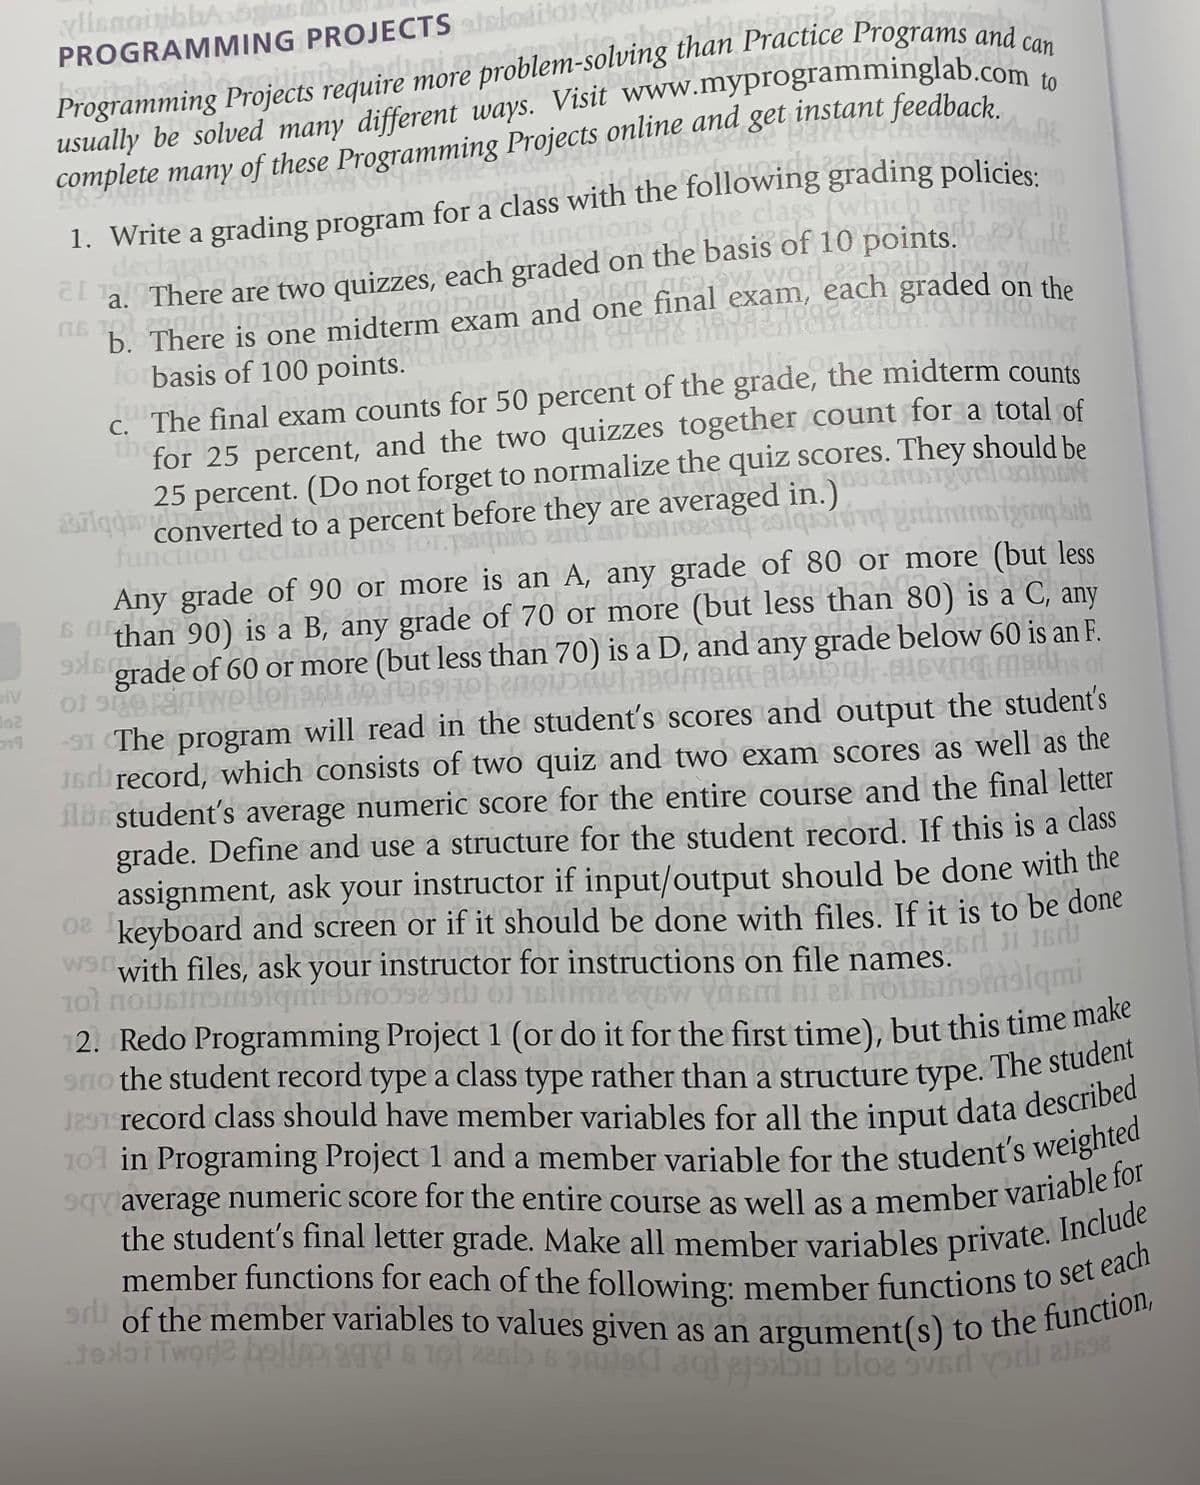 6 Ithan
of the member variables to values given as an argument(s) to the function,
the student's final letter grade. Make all member variables private. Include
member functions for each of the following: member functions to set each
101 in Programing Project 1 and a member variable for the student's weighted
PROGRAMMING PROJECTS ainlodildie
Practice Programs and can
iects require more problem-solving
Programming Projects
usually be solved many different ways. Visit www.myprogramminglab.com
complete many
of these Programming Projects online and
1. Write a grading program for a class with the following grading policies.
declaration
slutgers
ns of the class
(whi
hich are liste
or pi
C a. There are two quizzes, each graded on the basis of 10 points.
w worl eapaib
b. There is one midterm exam and one final exam, each graded on the
forbasis of 100 points.
C. The final exam counts for 50 percent of the grade, the midterm counts
thein
for 25 percent, and the two quizzes together count for a total of
ubliton
25 percent. (Do not forget to normalize the quiz scores. They should be
2ariqdionverted to a percent before they are averaged in.)
function
ns for
Any grade of 90 or more is an A, any grade of 80 or more (but less
6 than 90) is a B, any grade of 70 or more (but less than 80) is a C, any
9M6 grade of 60 or more (but less than 70) is a D, and any grade below 60 is an F.
piv
-91 The program will read in the student's scores and output the student's
1direcord, which consists of two quiz and two exam scores as well as the
ilbe student's average numeric score for the entire course and the final letter
grade. Define and use a structure for the student record. If this is a class
assignment, ask your instructor if input/output should be done with the
keyboard and screen or if it should be done with files. If it is to be done
with files, ask your instructor for instructions on file names.
slimaeyow vasm hi
2. Redo Programming Project 1 (or do it for the first time), but this time make
alami
a
vaverage numeric score for the entire course as well as a member variabie
worde bel
